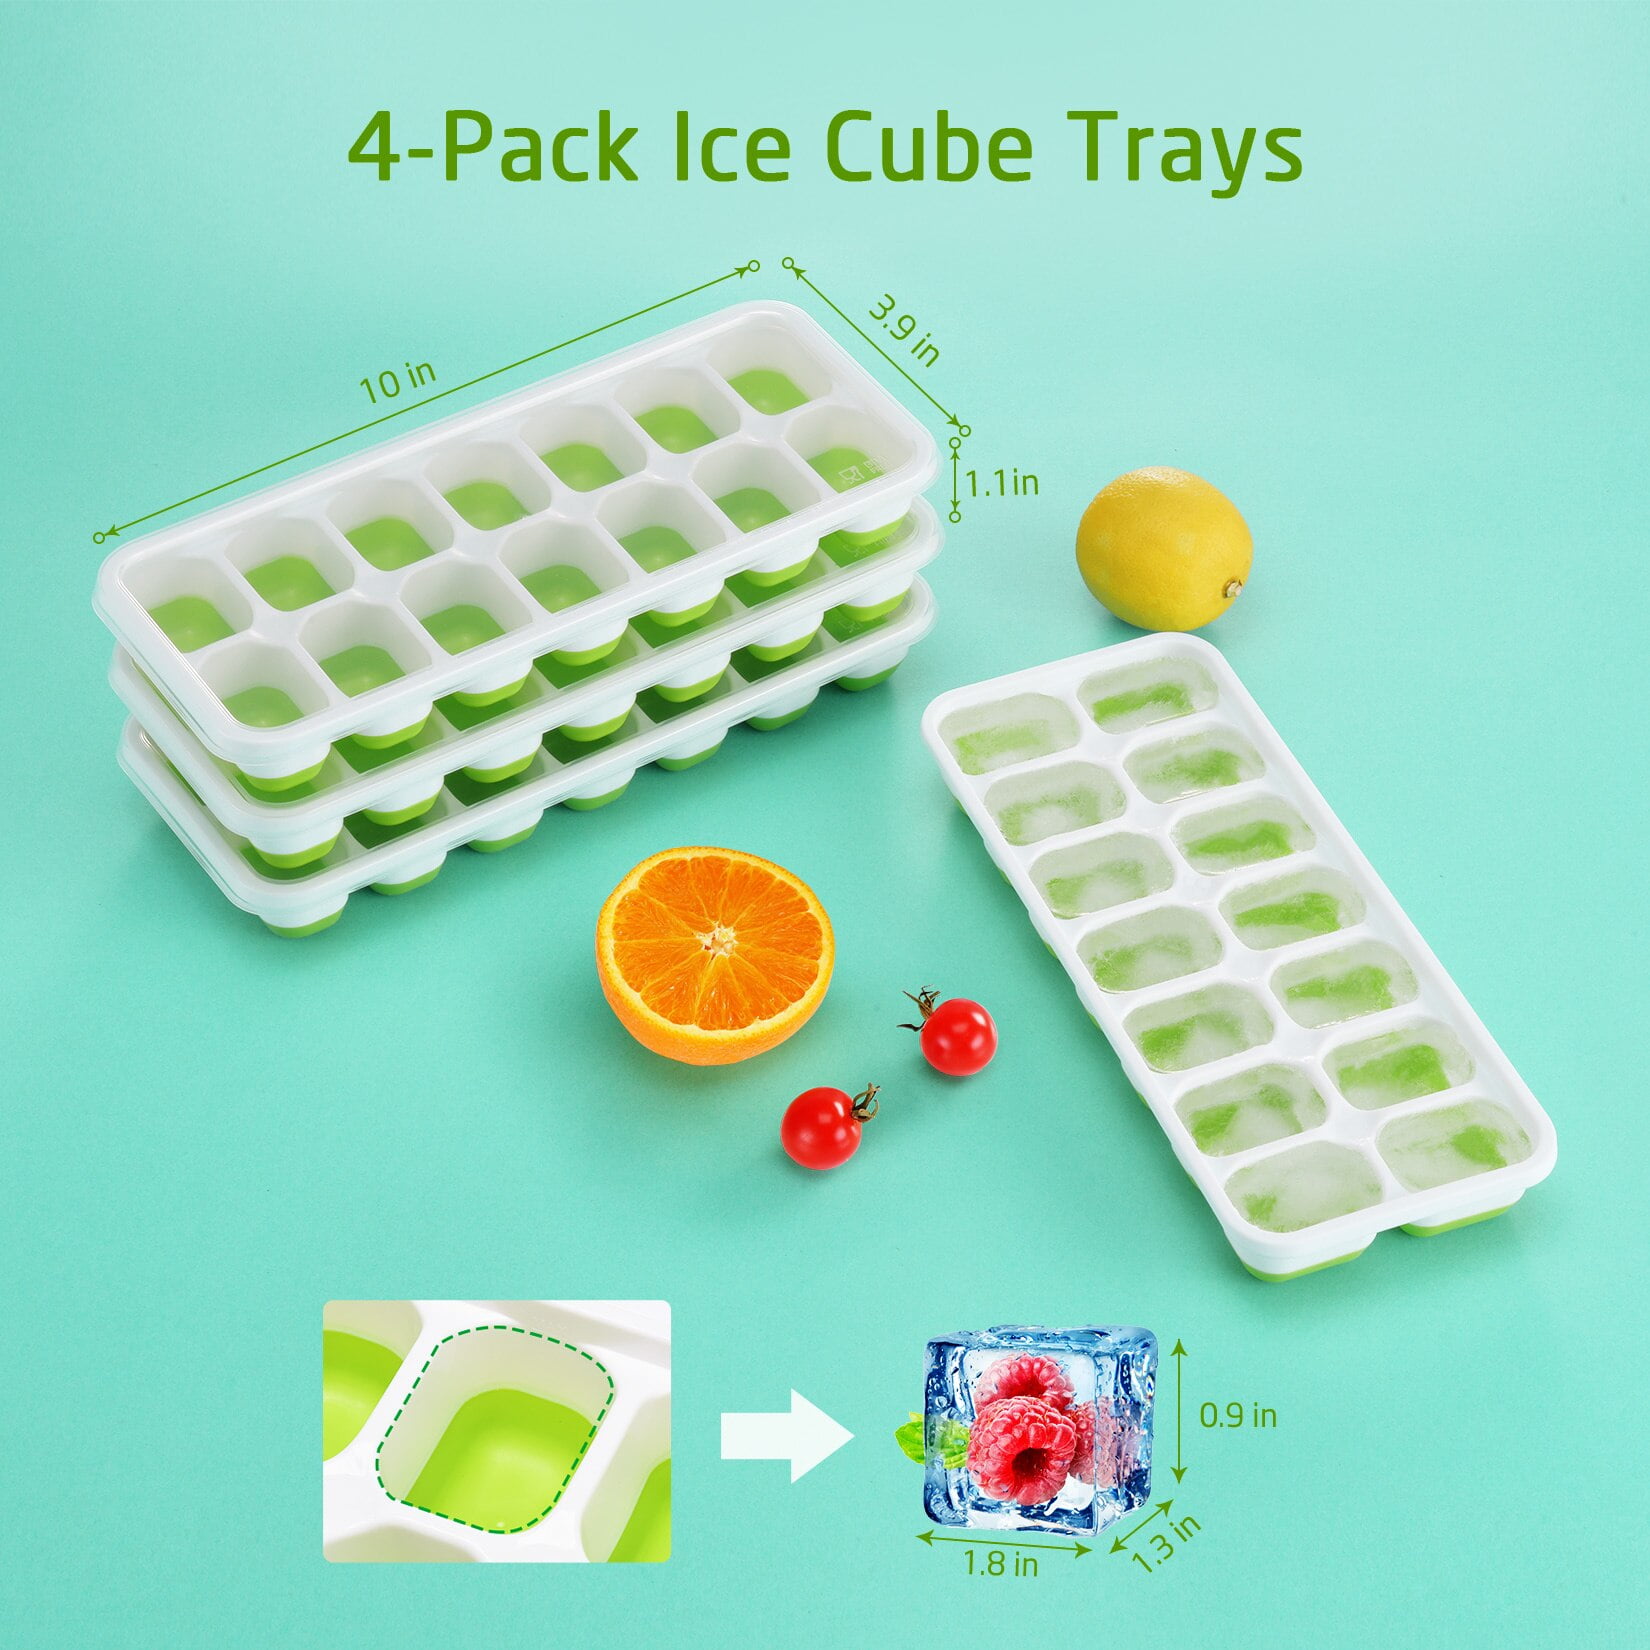 Stackable Durable and Dishwasher Safe OMorc Ice Cube Trays 4 Pack Easy-Release Silicone and Flexible 14-Ice Trays with Unique Removable Lid BPA Free Larger Version Make Larger Ice Cubes 